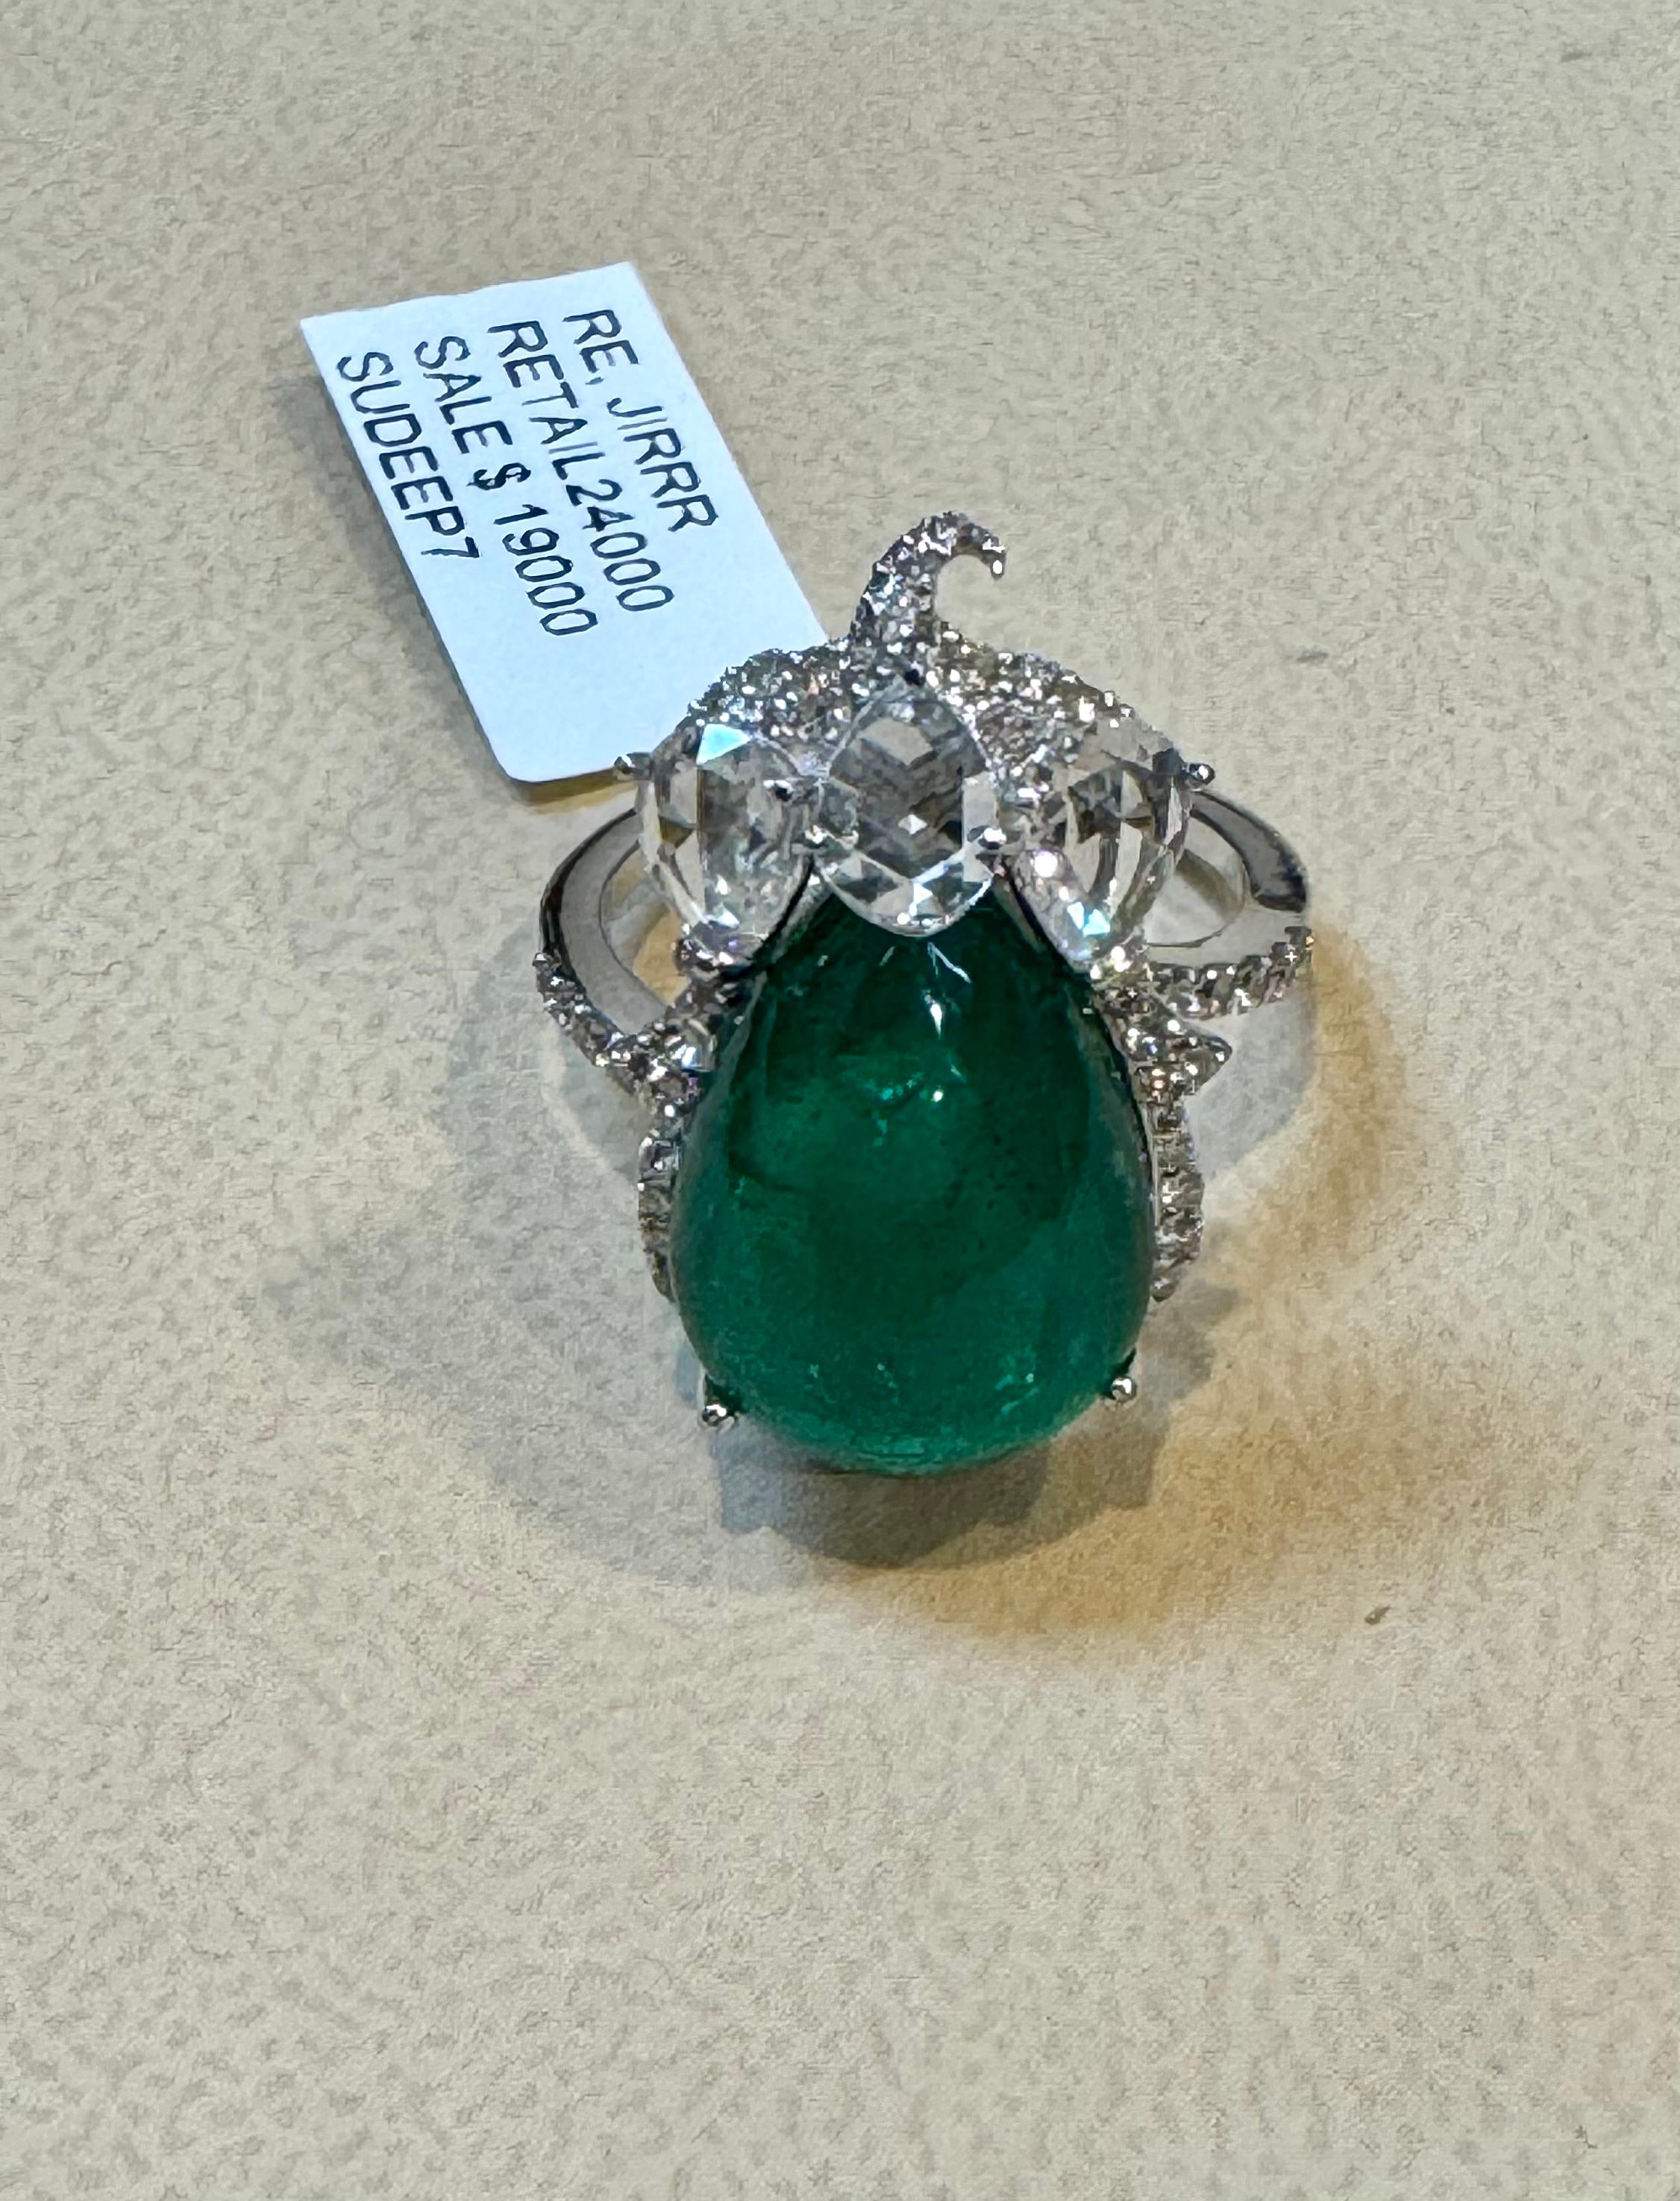 9 Ct Finest Zambian Sugar Loaf Emerald & 2 Ct Rose Cut Diamond Ring Size 7 For Sale 4